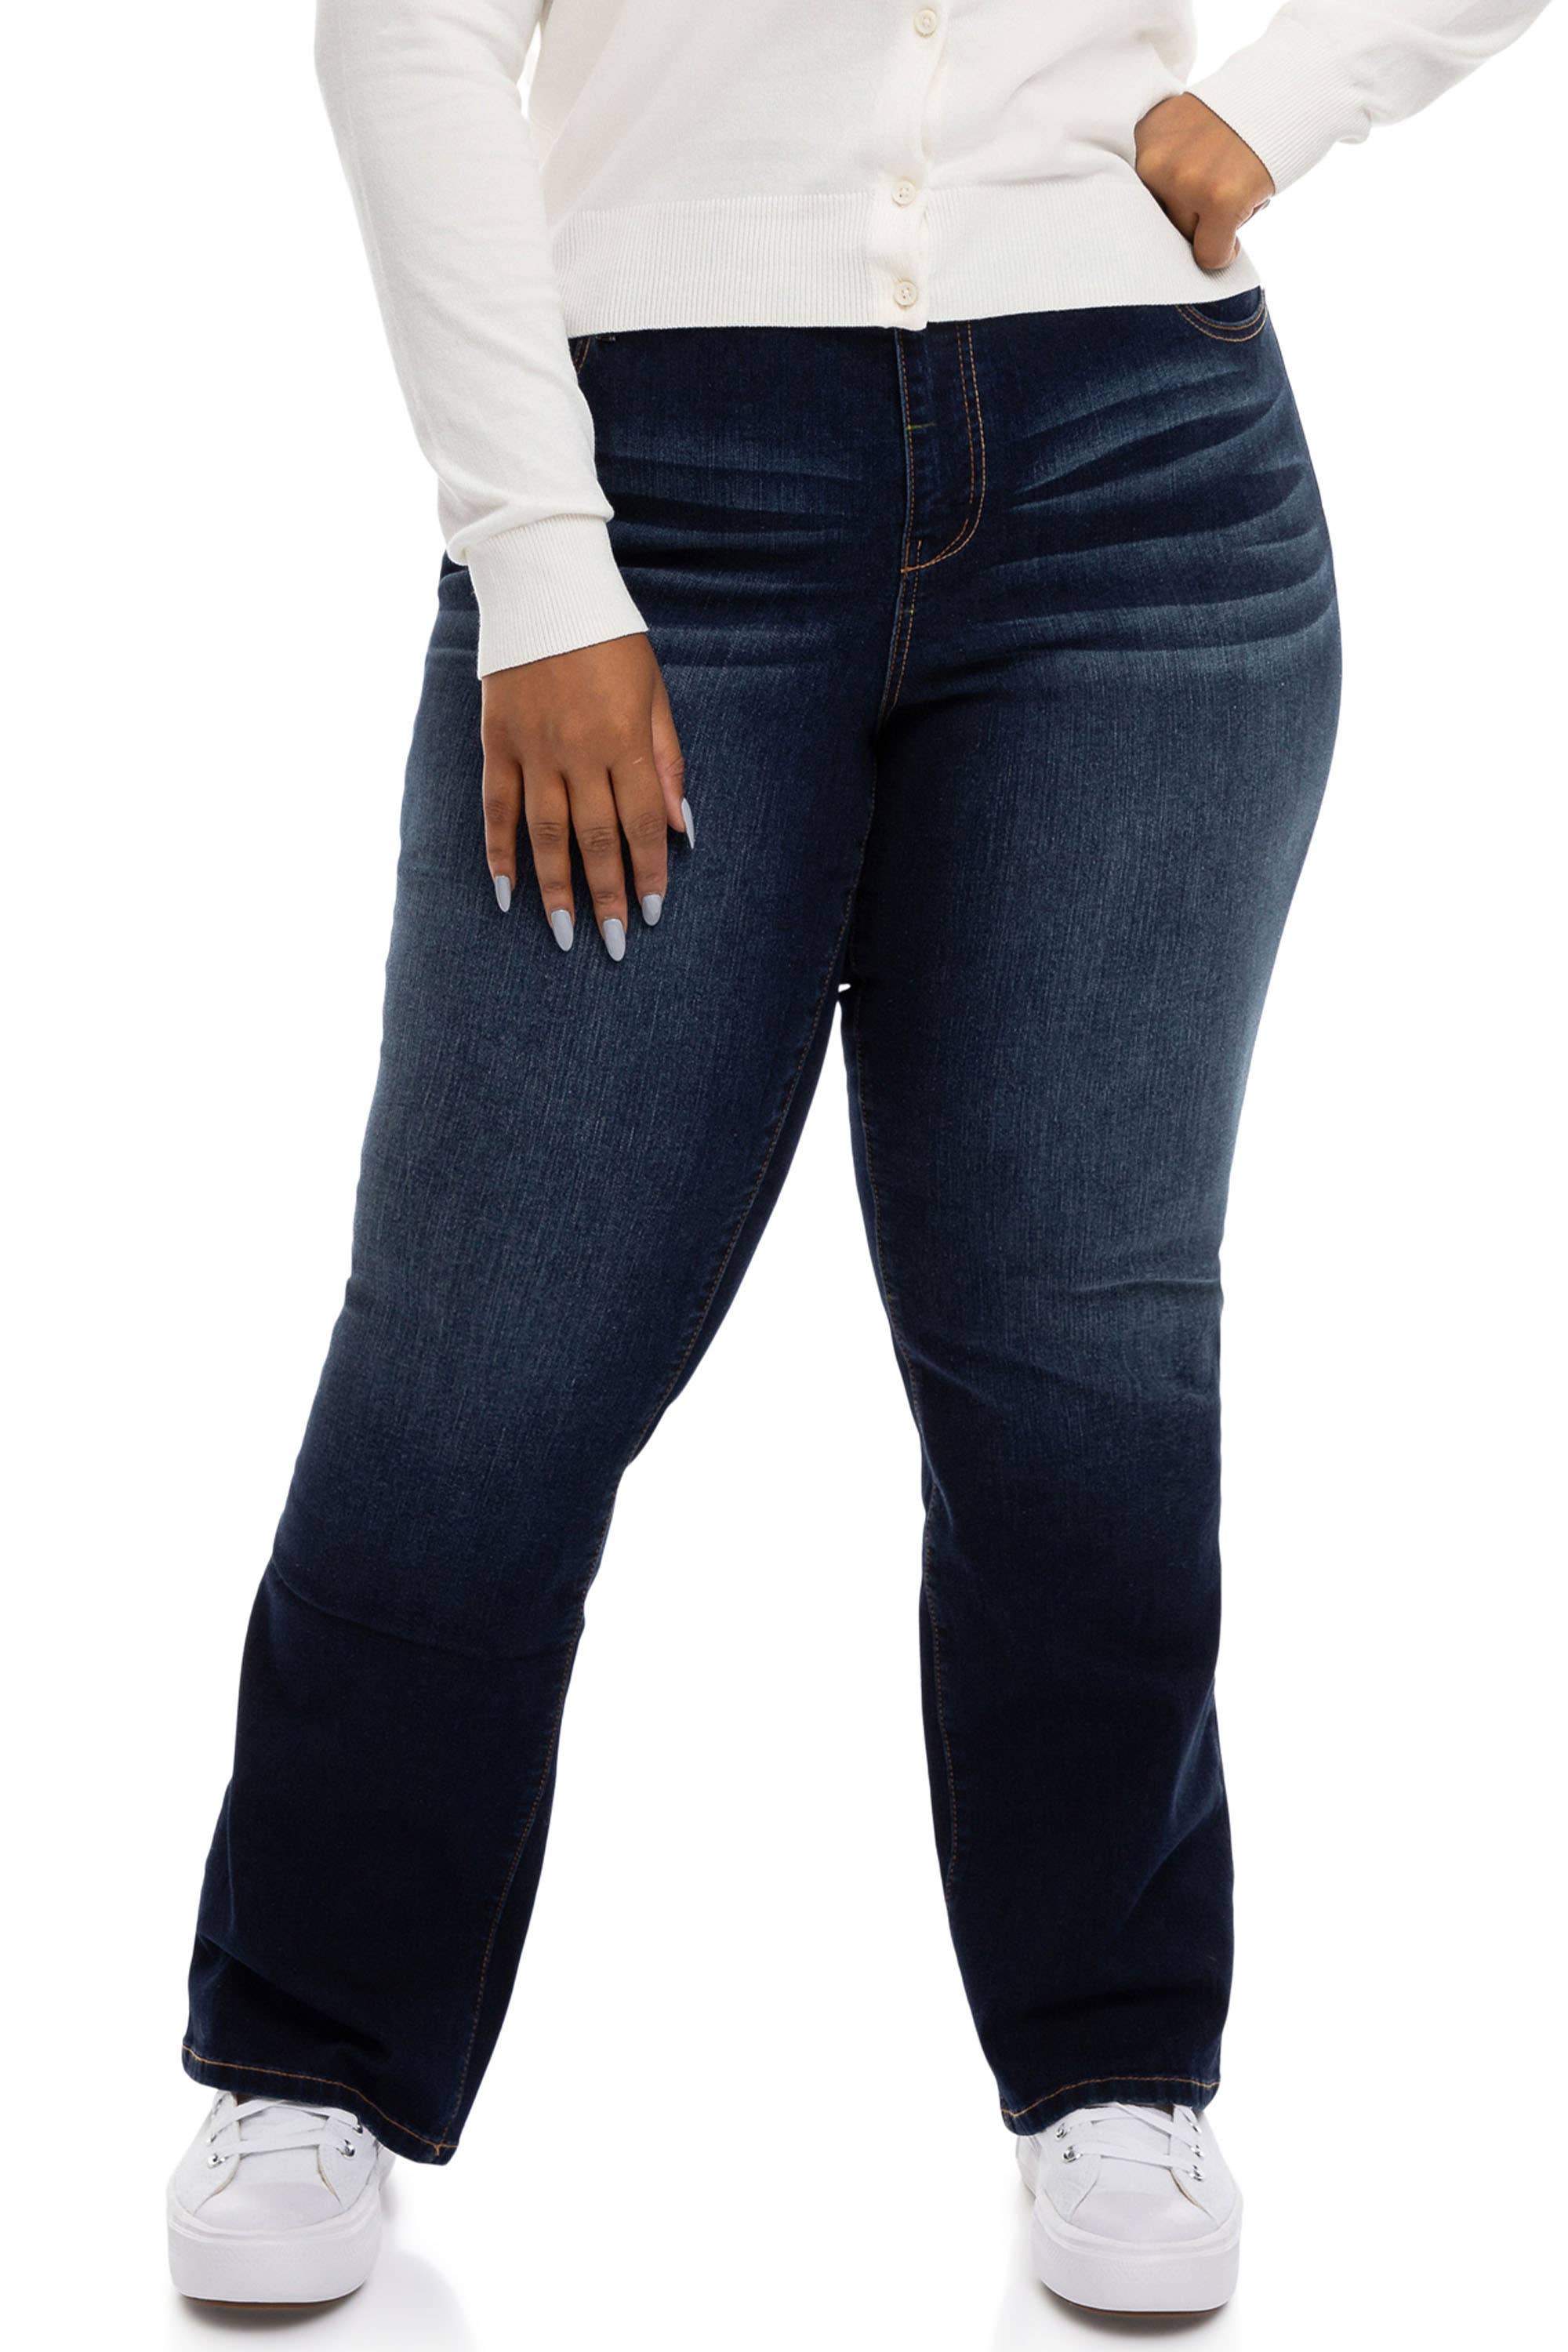 Buy Lee Women's Plus Size High Rise Mini Flare Jean, Frontier, 20 Plus at